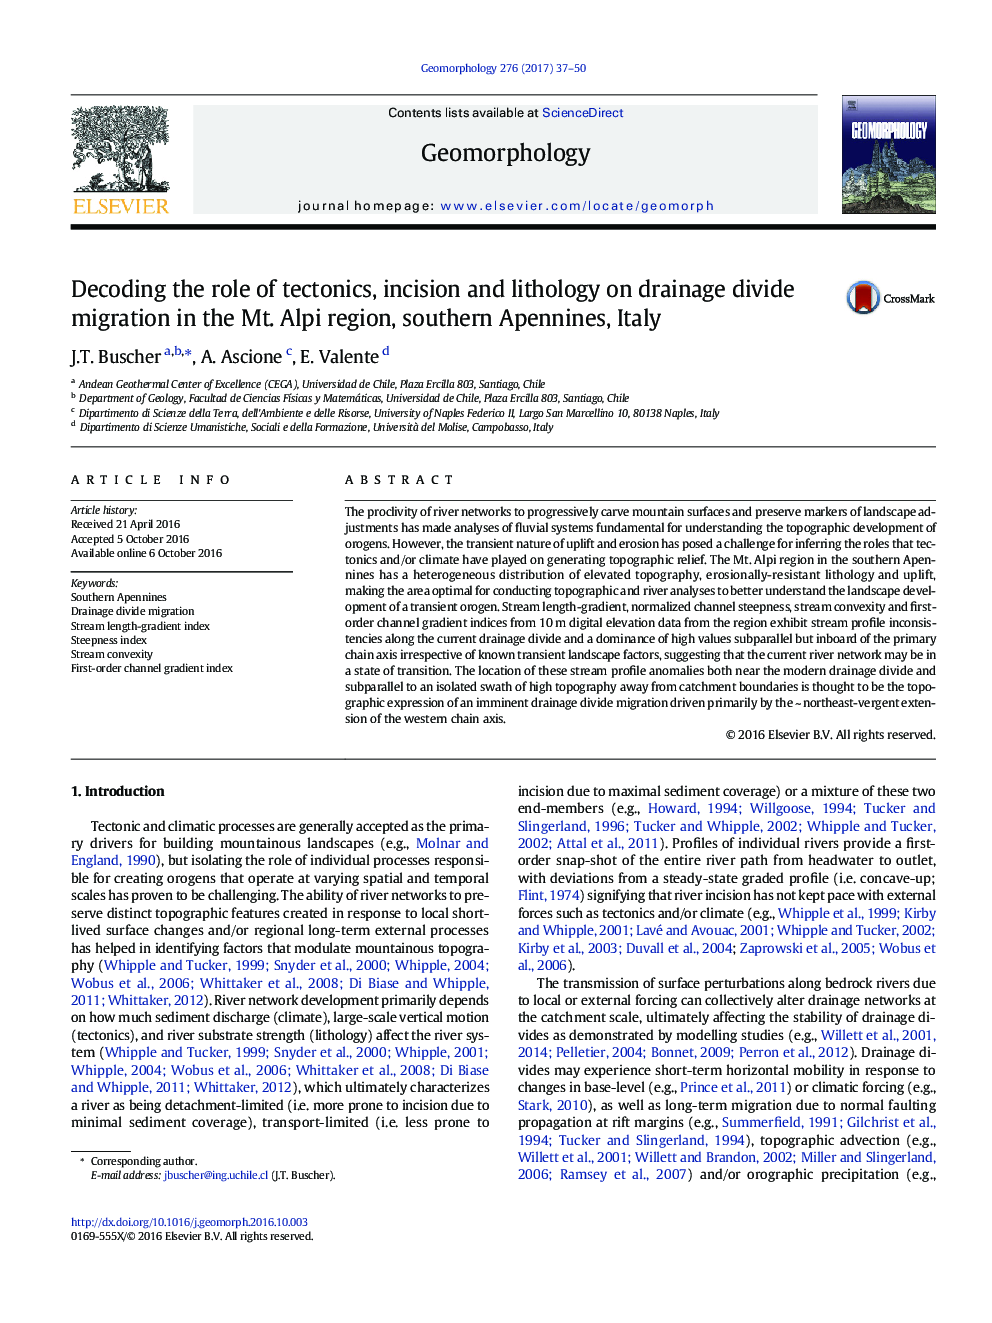 Decoding the role of tectonics, incision and lithology on drainage divide migration in the Mt. Alpi region, southern Apennines, Italy